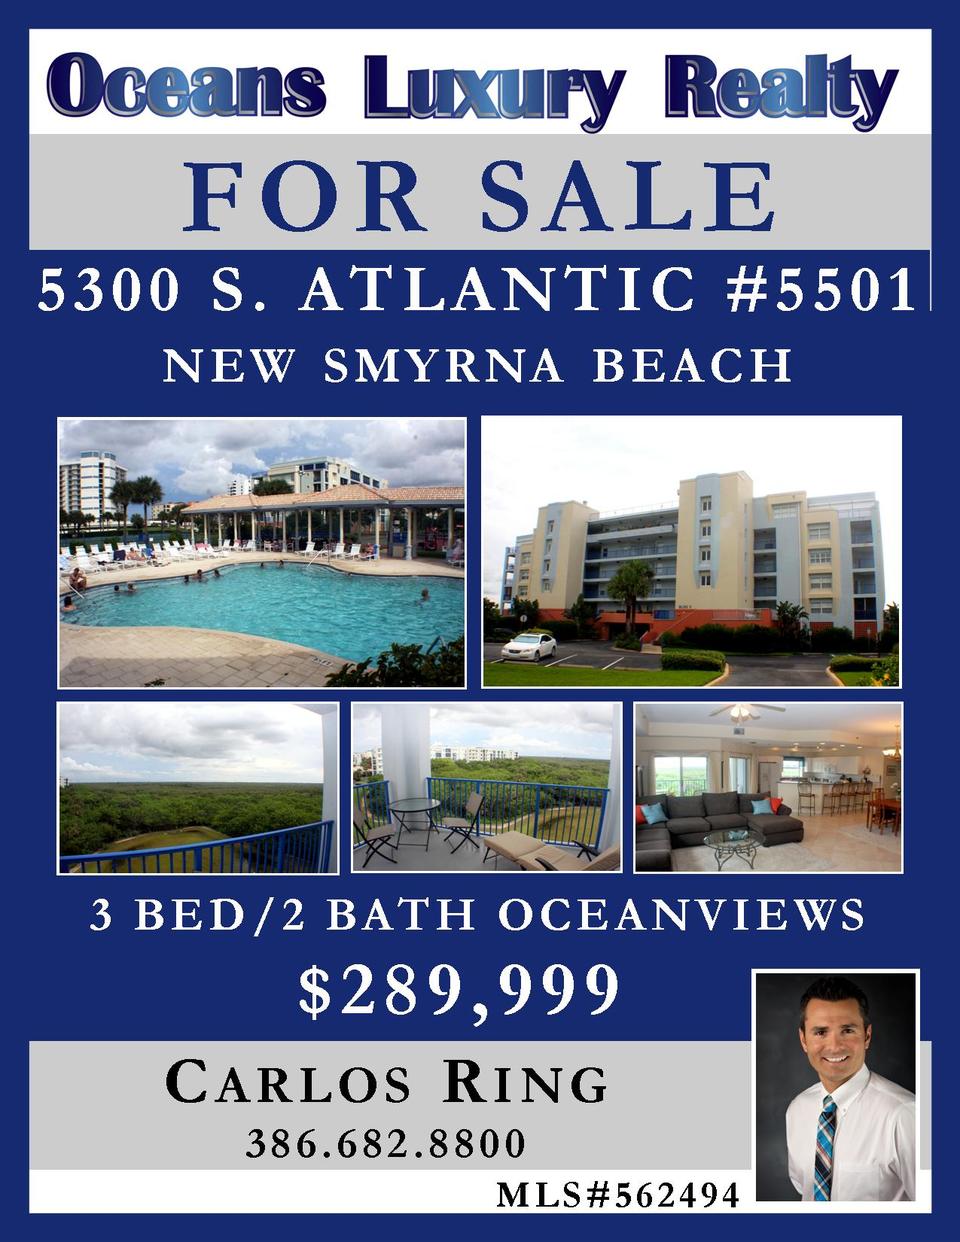 FOR SALE! 3 BED/2 BATH WITH OCEANVIEWS IN NSB!